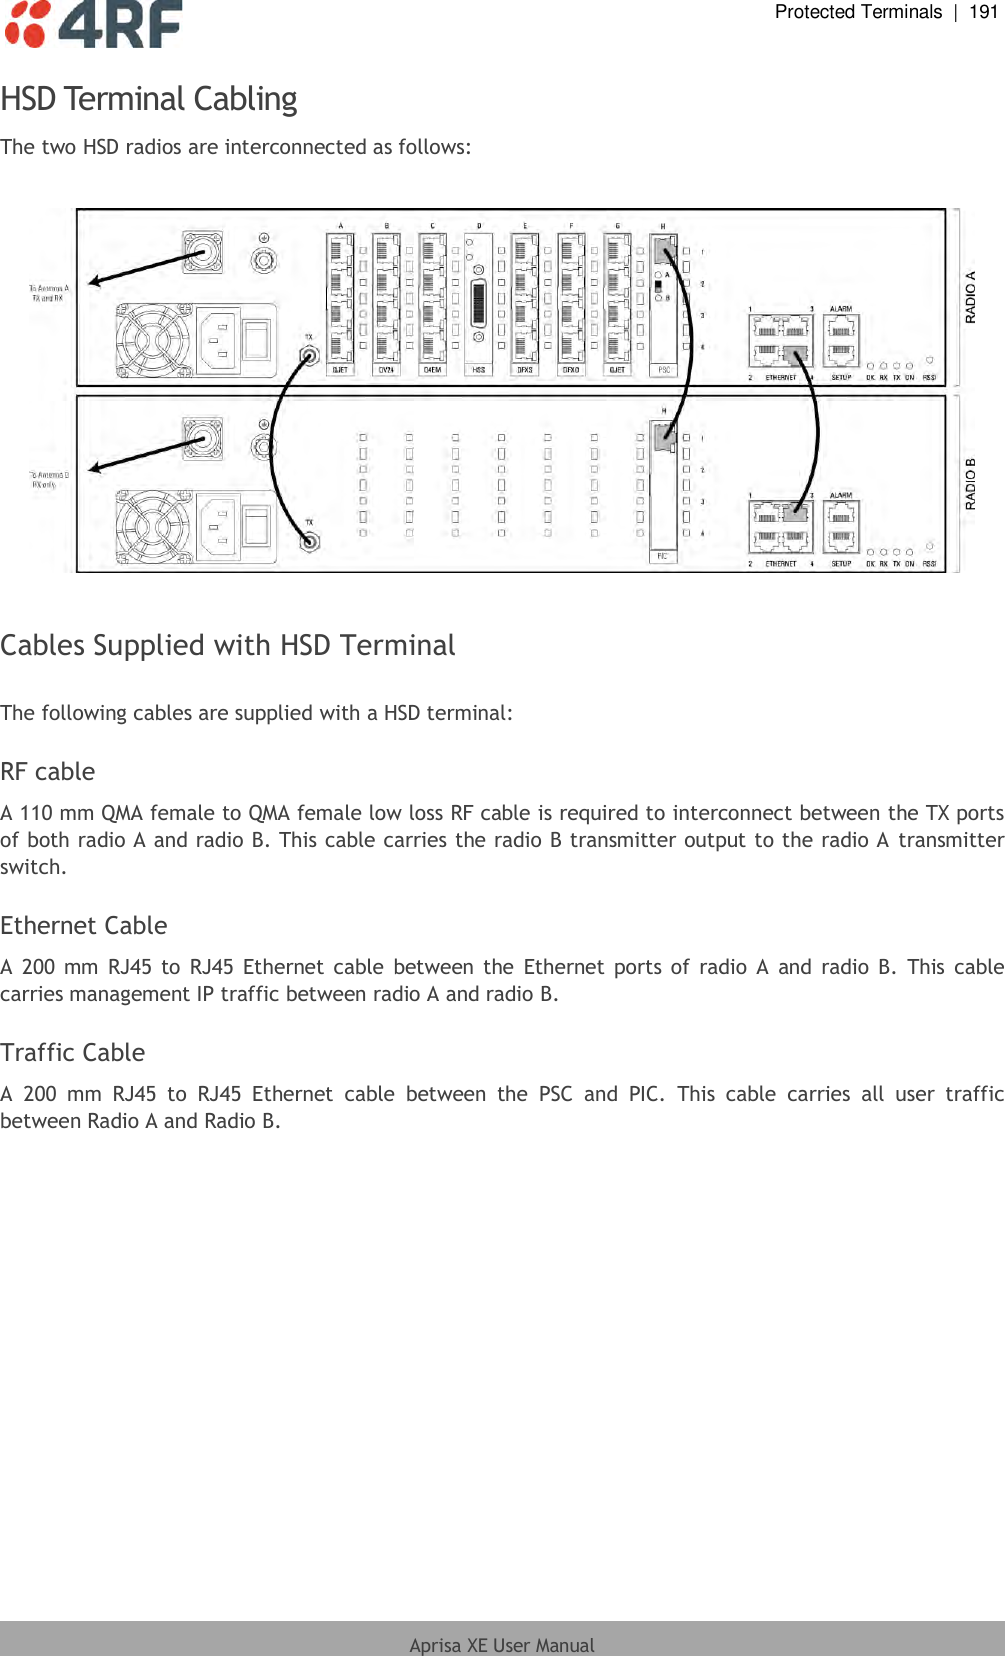  Protected Terminals  |  191  Aprisa XE User Manual  HSD Terminal Cabling The two HSD radios are interconnected as follows:    Cables Supplied with HSD Terminal  The following cables are supplied with a HSD terminal:  RF cable A 110 mm QMA female to QMA female low loss RF cable is required to interconnect between the TX ports of both radio A and radio B. This cable carries the radio B transmitter output to the radio A  transmitter switch.  Ethernet Cable A  200  mm  RJ45  to  RJ45  Ethernet  cable  between  the Ethernet  ports  of  radio A  and radio  B.  This cable carries management IP traffic between radio A and radio B.  Traffic Cable A  200  mm  RJ45  to  RJ45  Ethernet  cable  between  the  PSC  and  PIC.  This  cable  carries  all  user  traffic between Radio A and Radio B.  